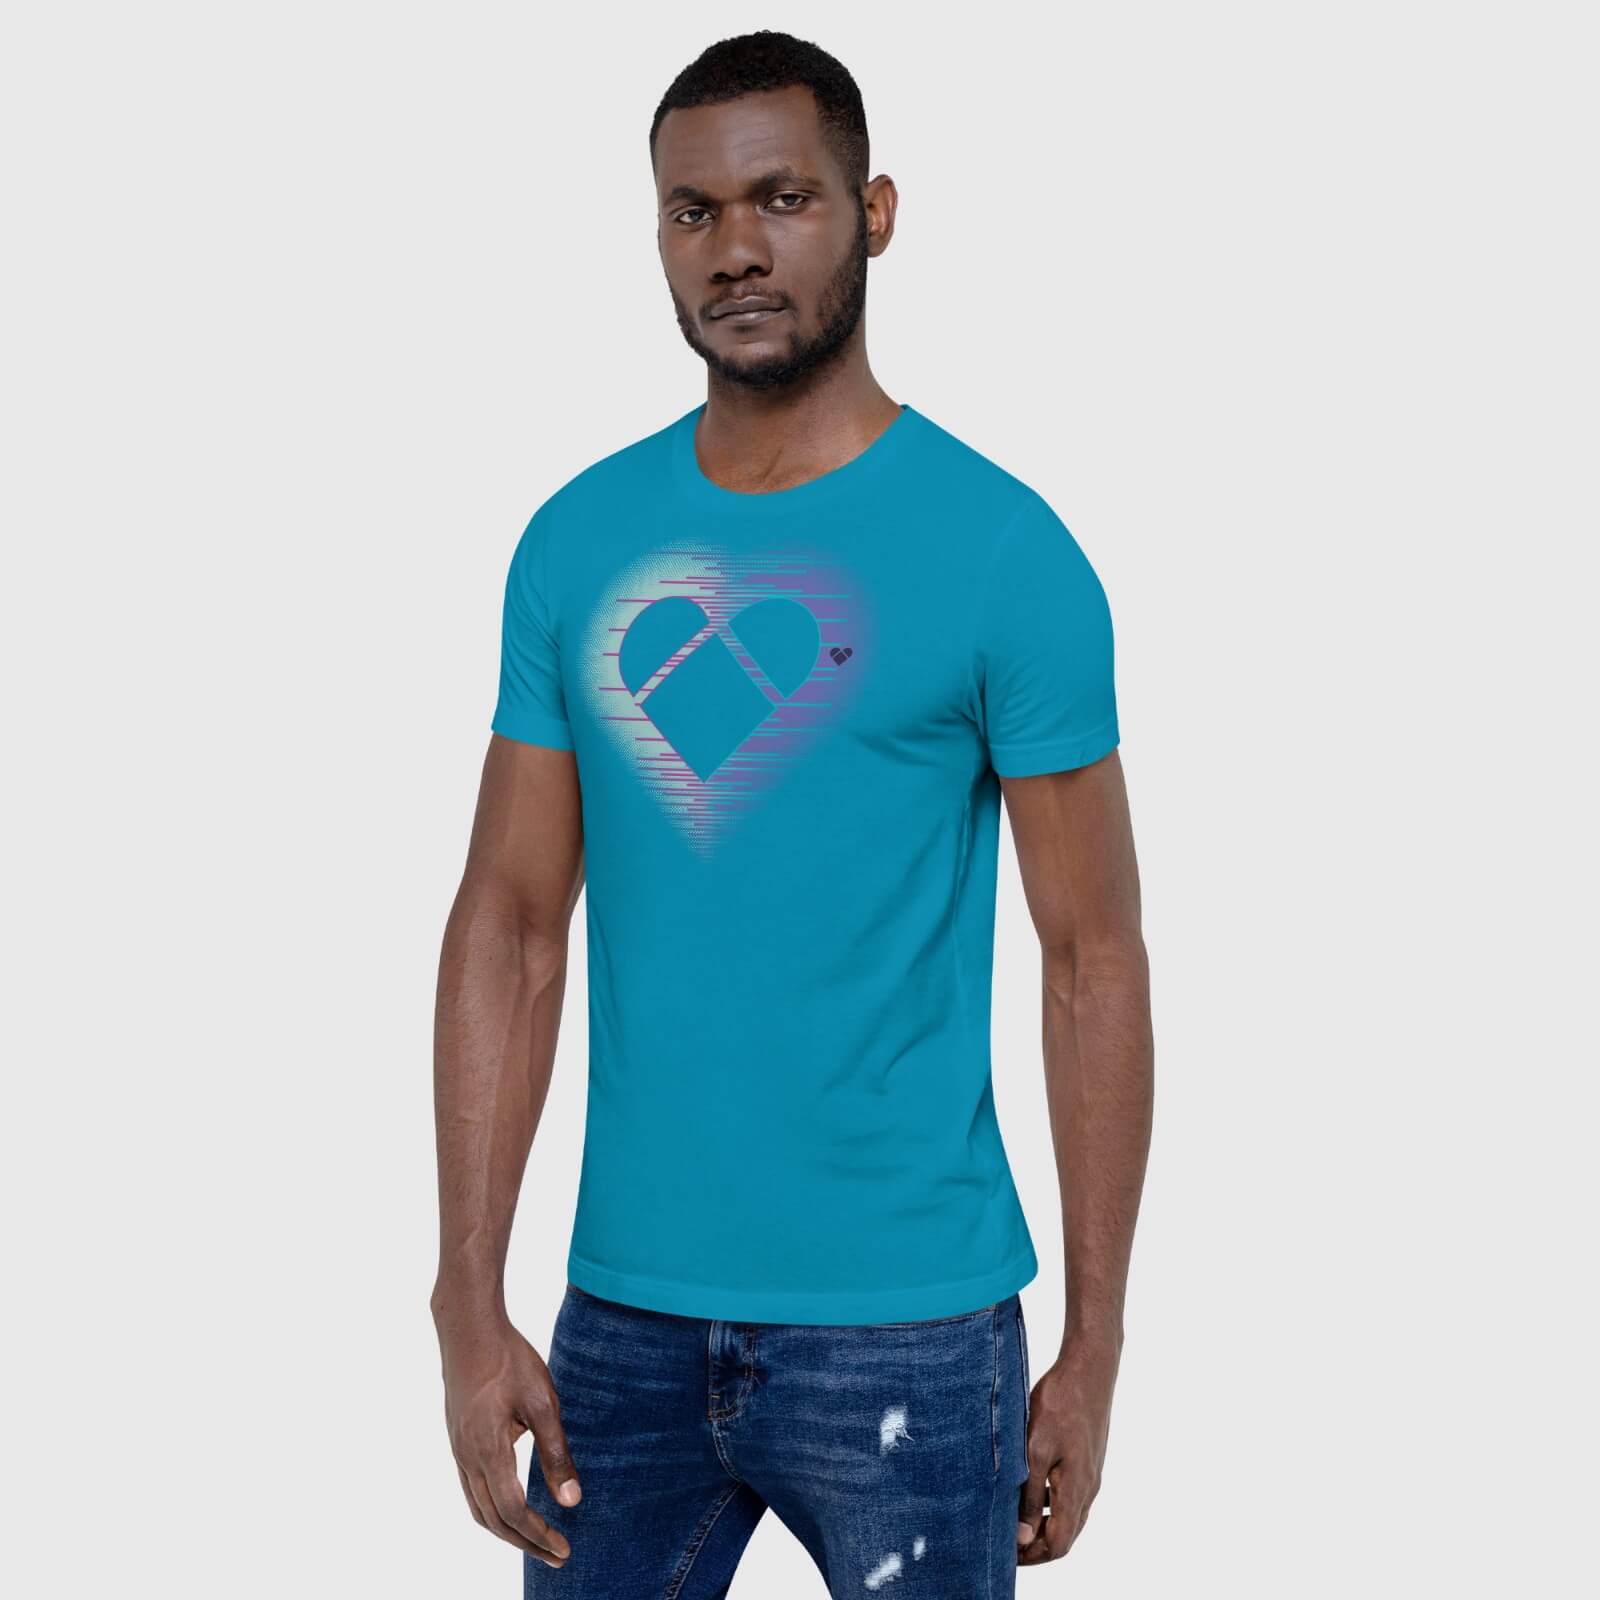 fashion: Aqua Tee with heart logo and mint-periwinkle aura from Amor Dual collection